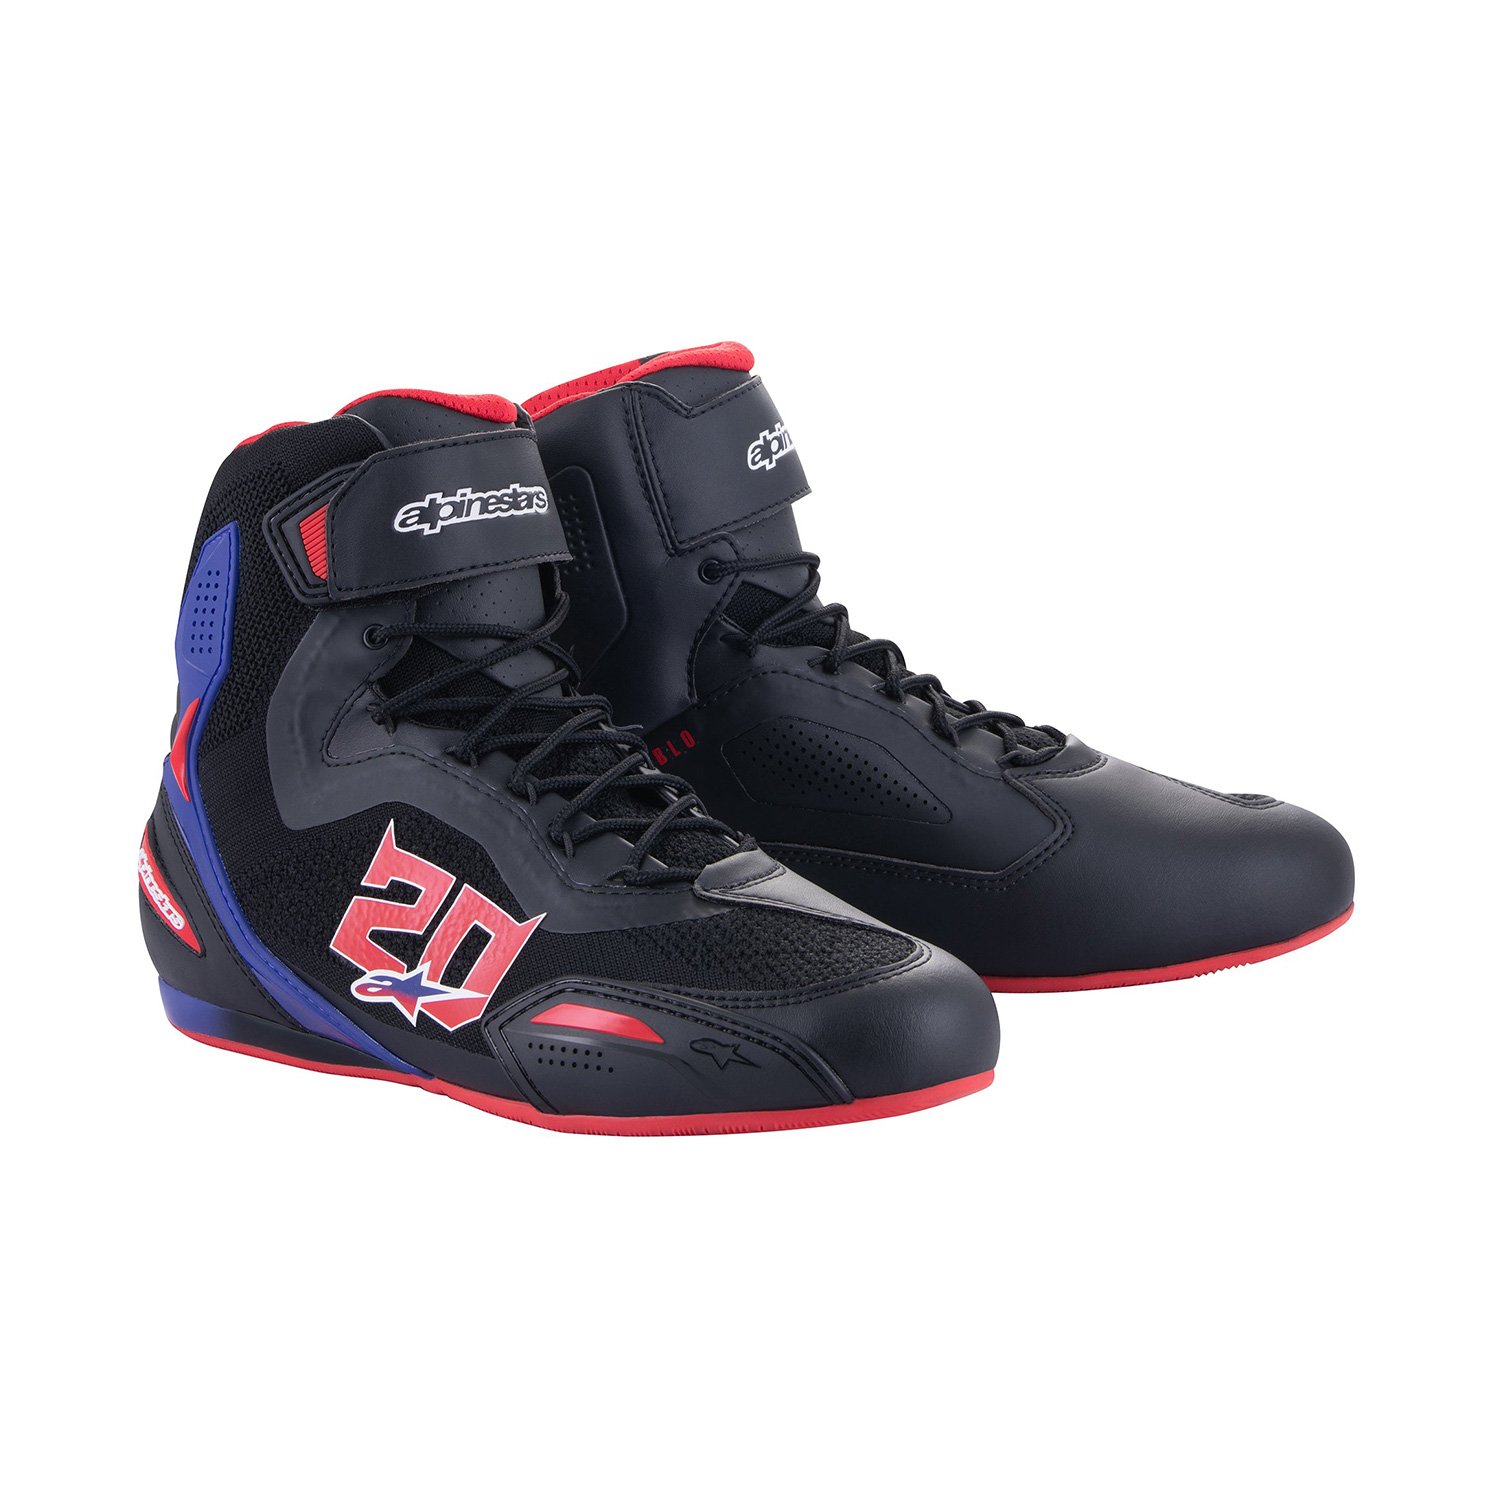 Image of EU Alpinestars FQ20 Faster-3 Rideknit Noir Bright Rouge Bleu Chaussures Taille US 6